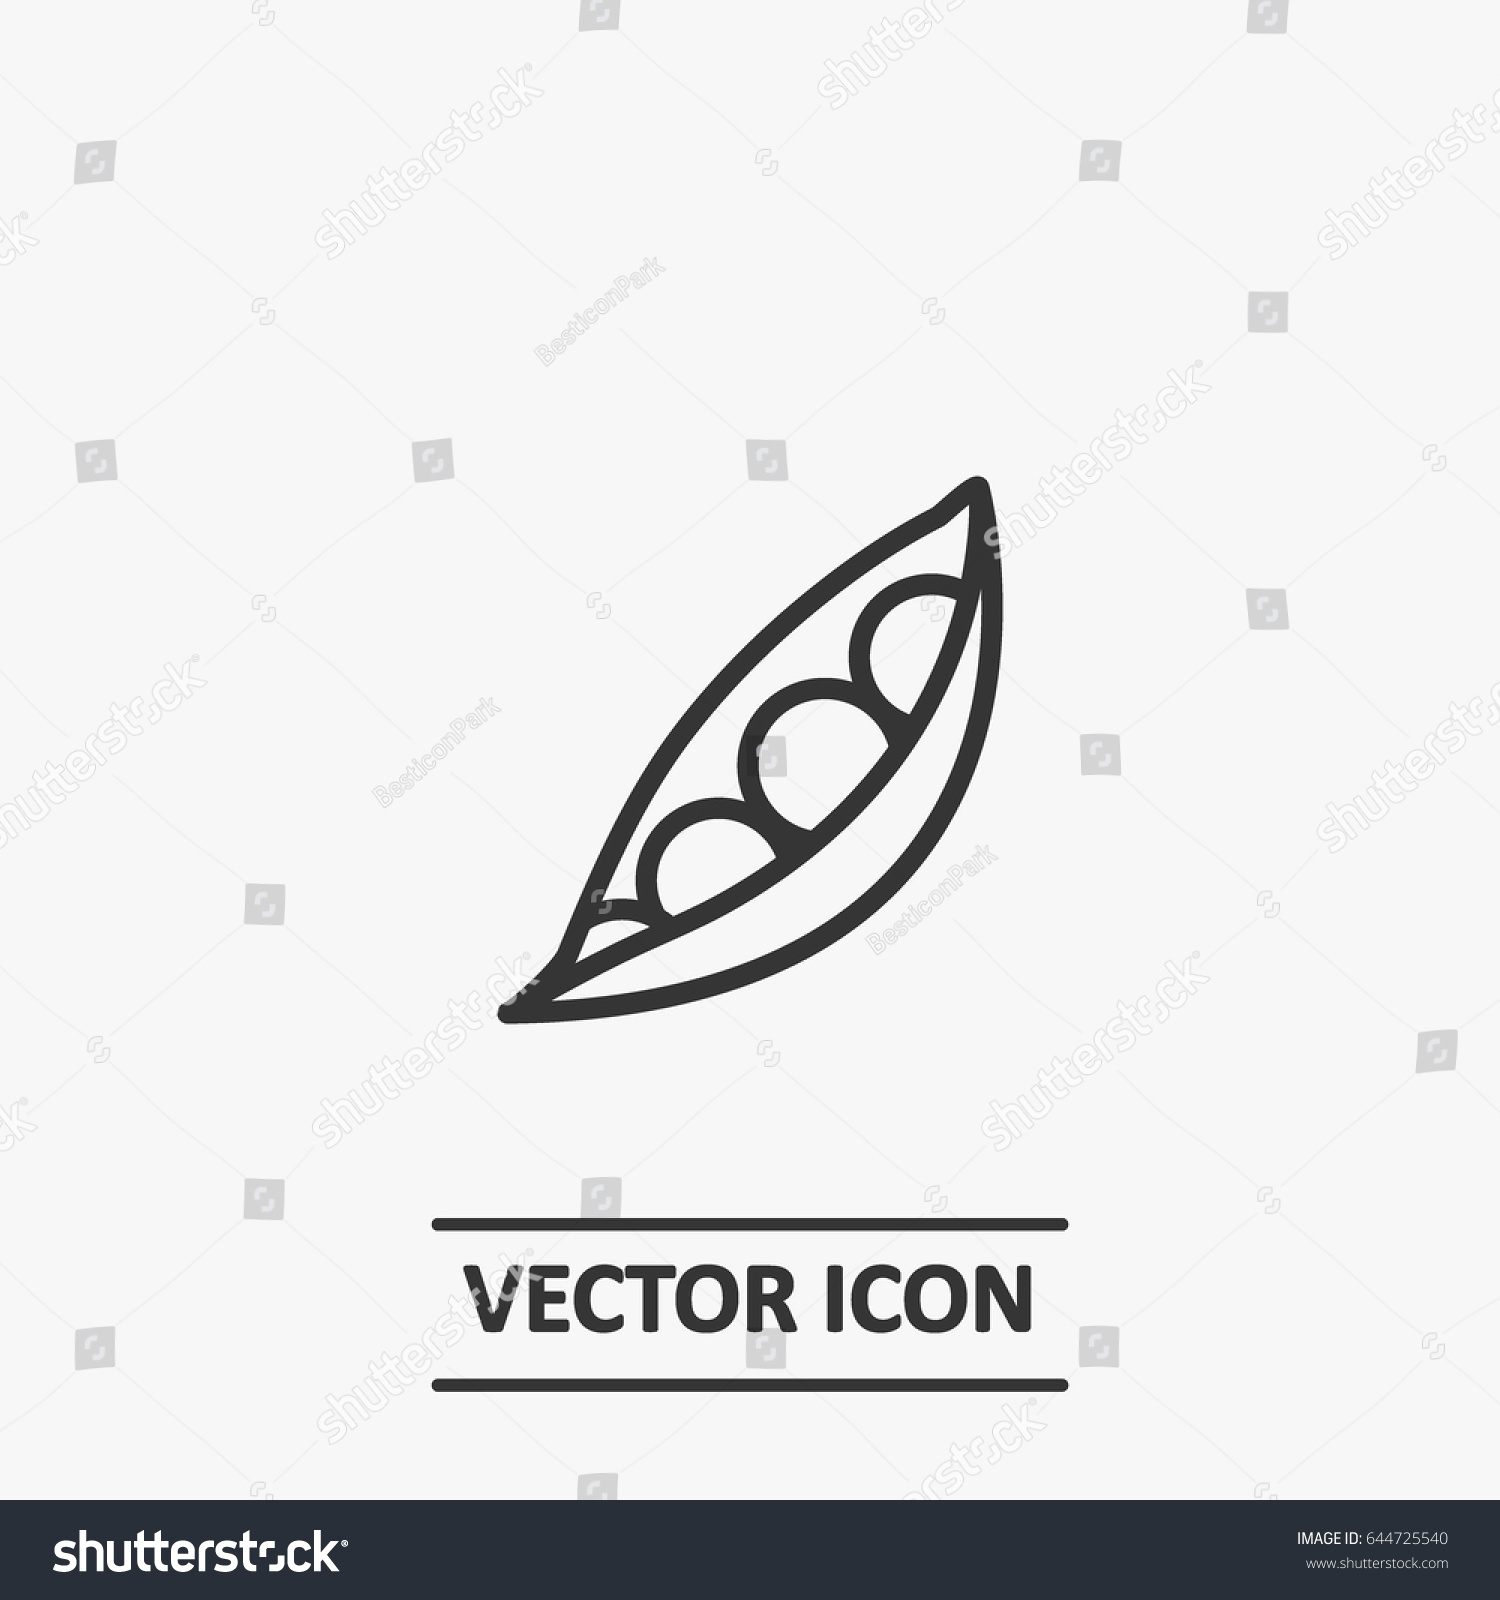 Outline soybean icon illustration vector symbol #644725540